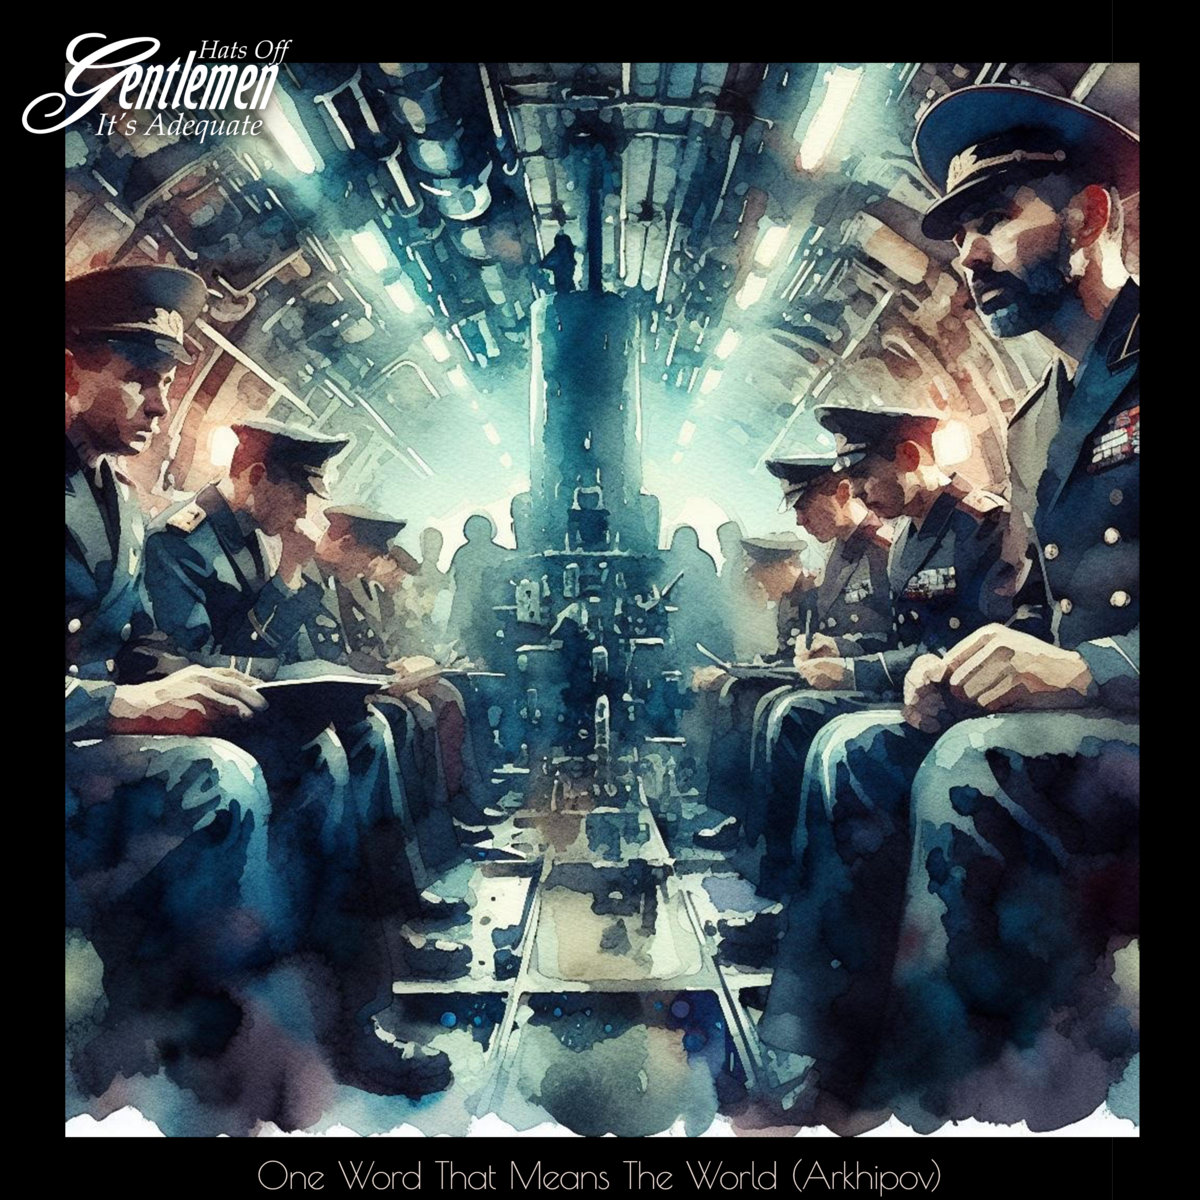 New at REAL GONE: Hats Off Gentlemen It's Adequate - One Word That Means The World (Arkhipov) / Music For Dancing (review & stream) realgonerocks.com/2024/04/hats-o… #prog #fusion #stream